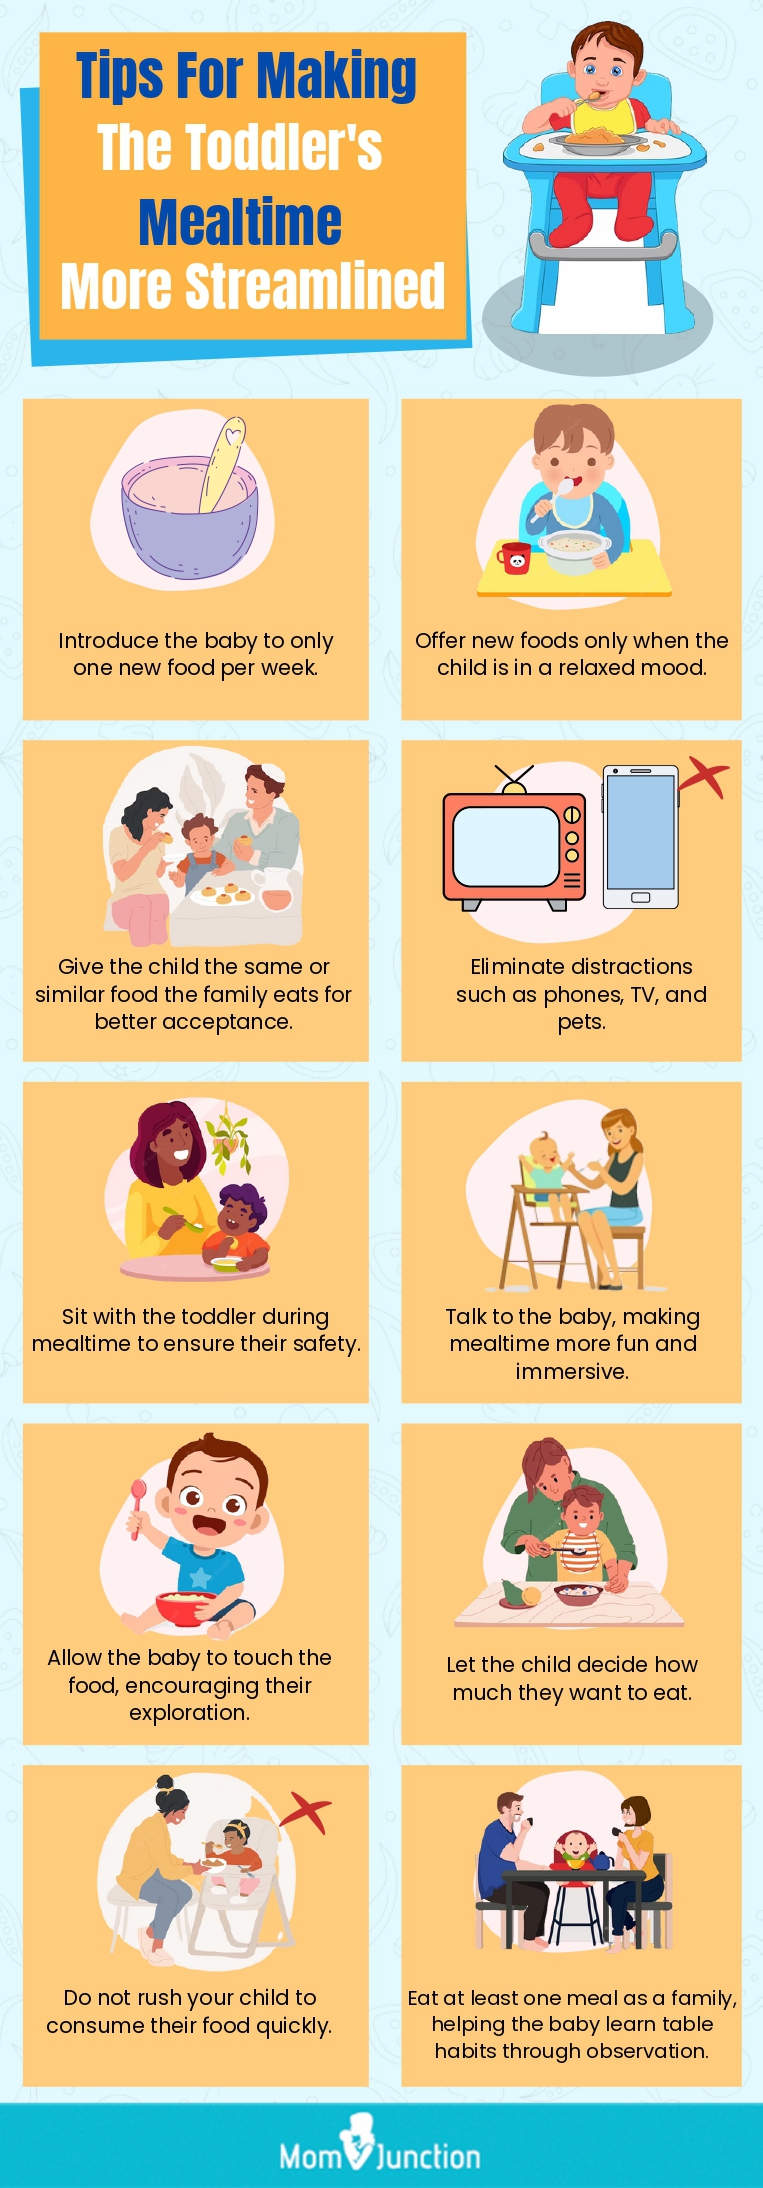 Tips For Making The Toddlers Mealtime More Streamlined (infographic)